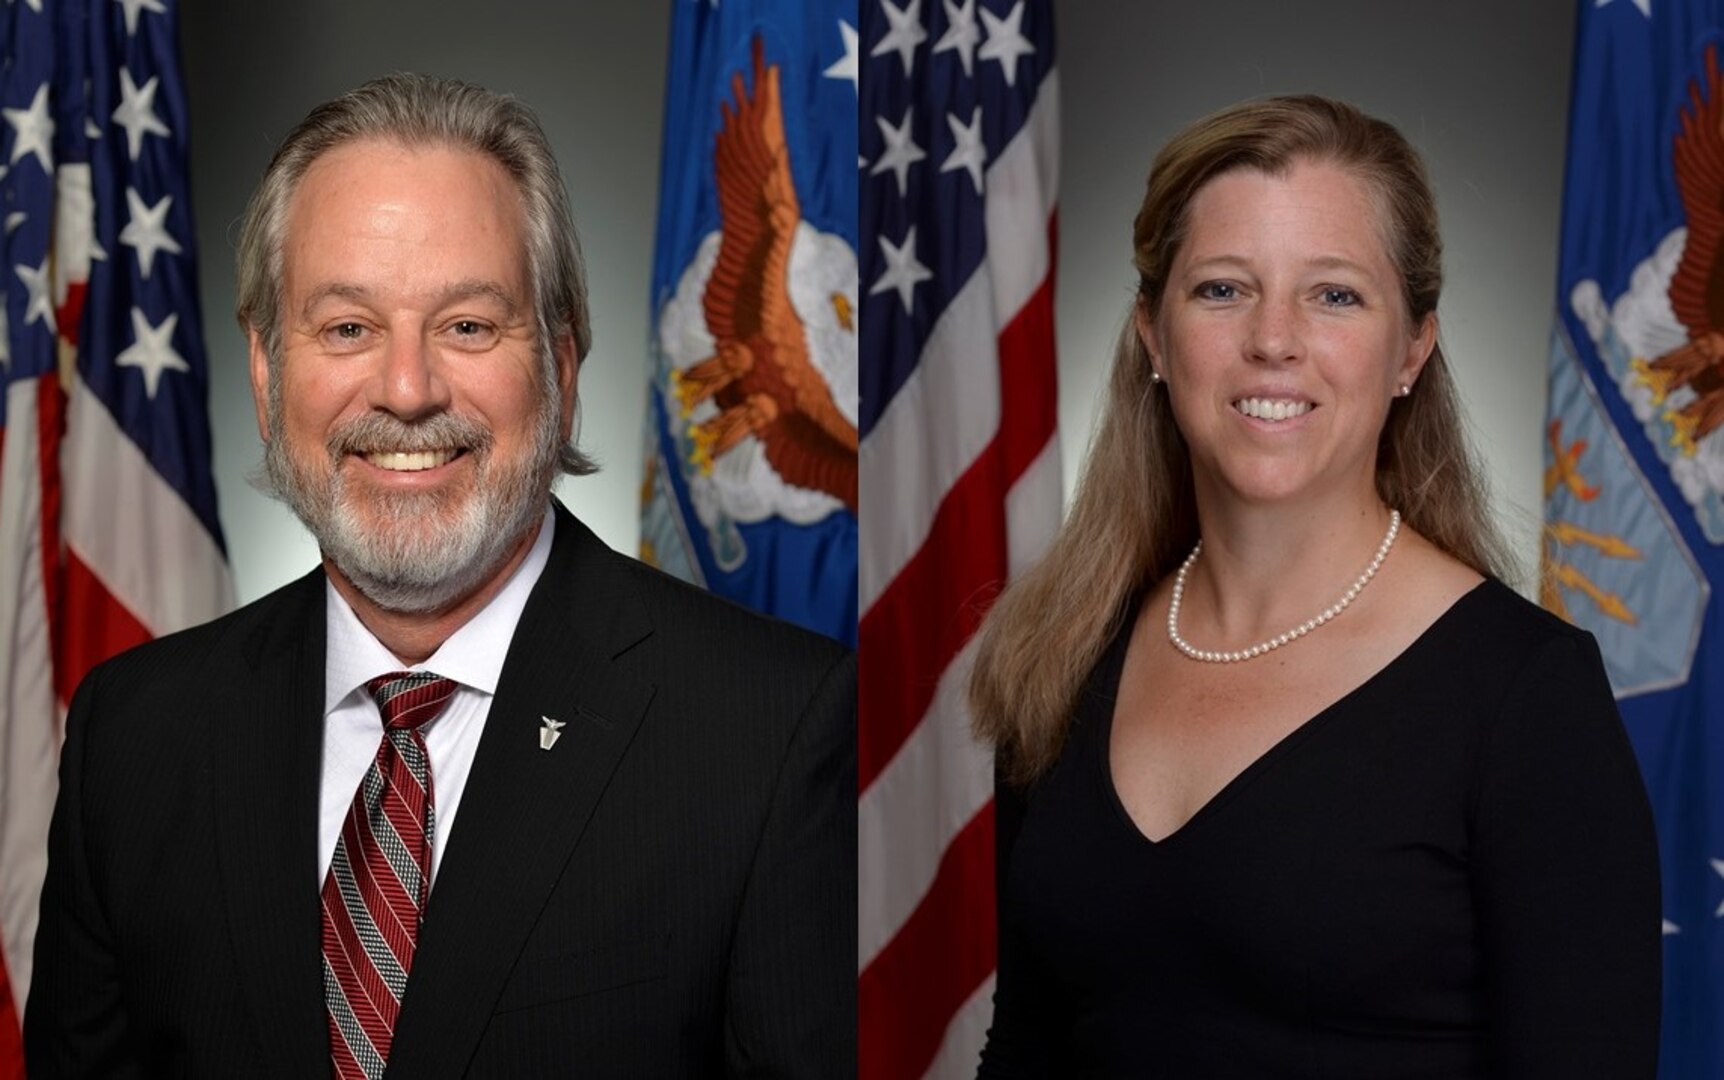 Joint Base San Antonio-Randolph and JBSA-Lackland will host Anthony Reardon, the Administrative Assistant to the Secretary of the Air Force, and Gwendolyn DeFilippi, the Principal Assistant to the Deputy Chief of Staff for Manpower, Personnel and Services, Aug. 21 and 22.